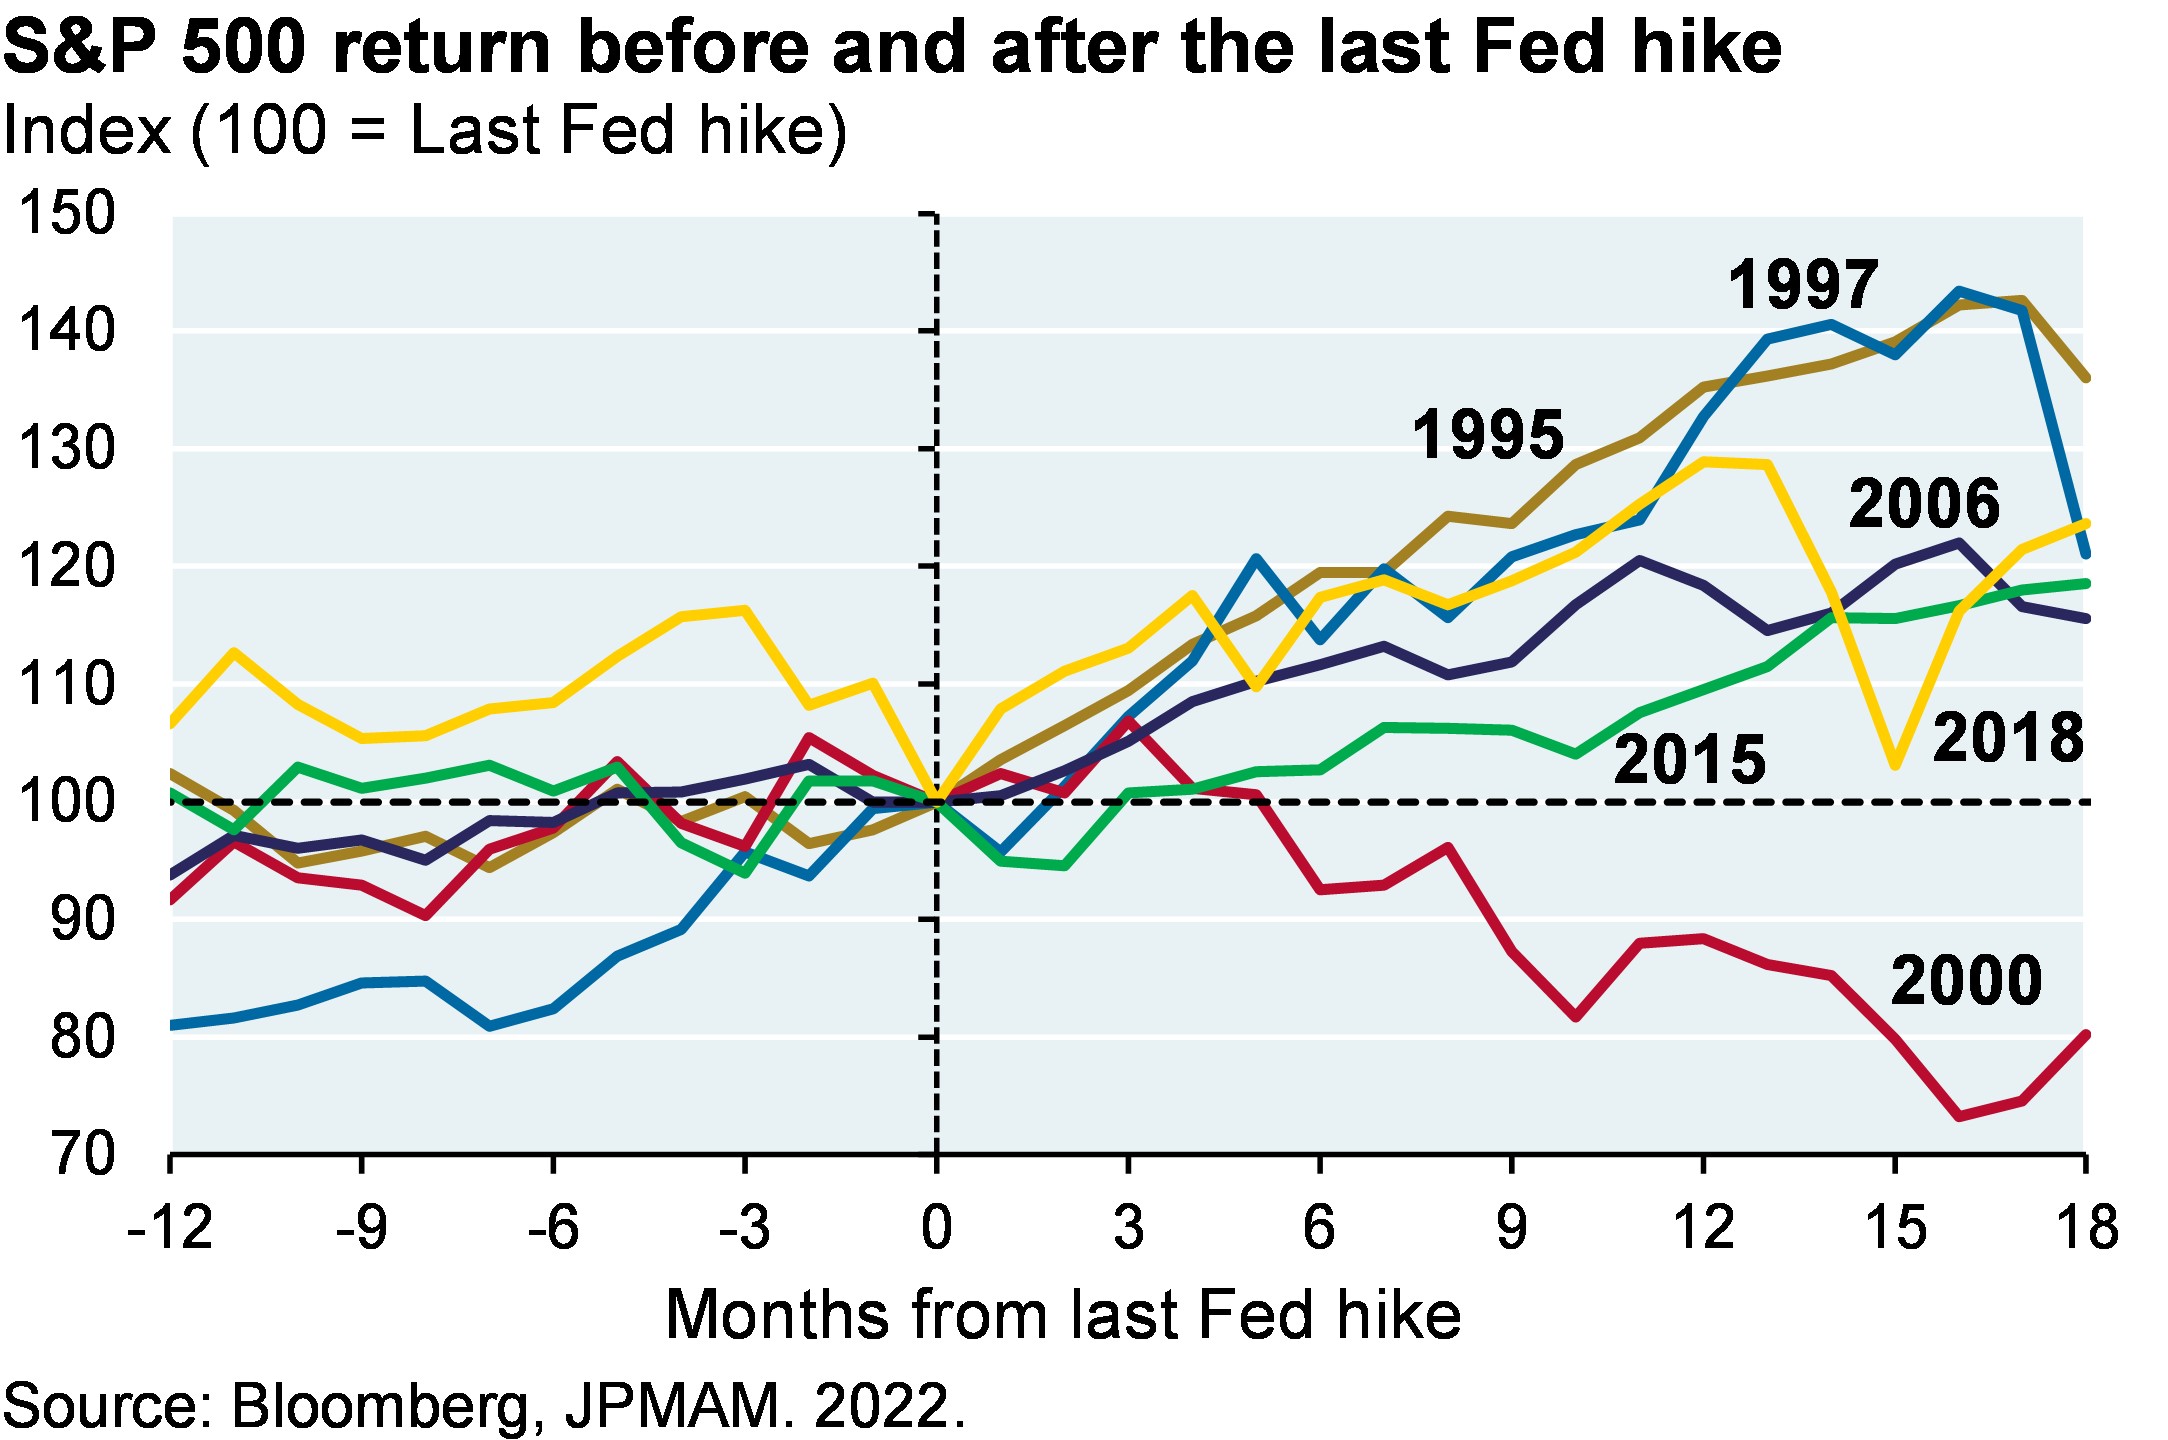 S&P 500 return before and after the last Fed hike